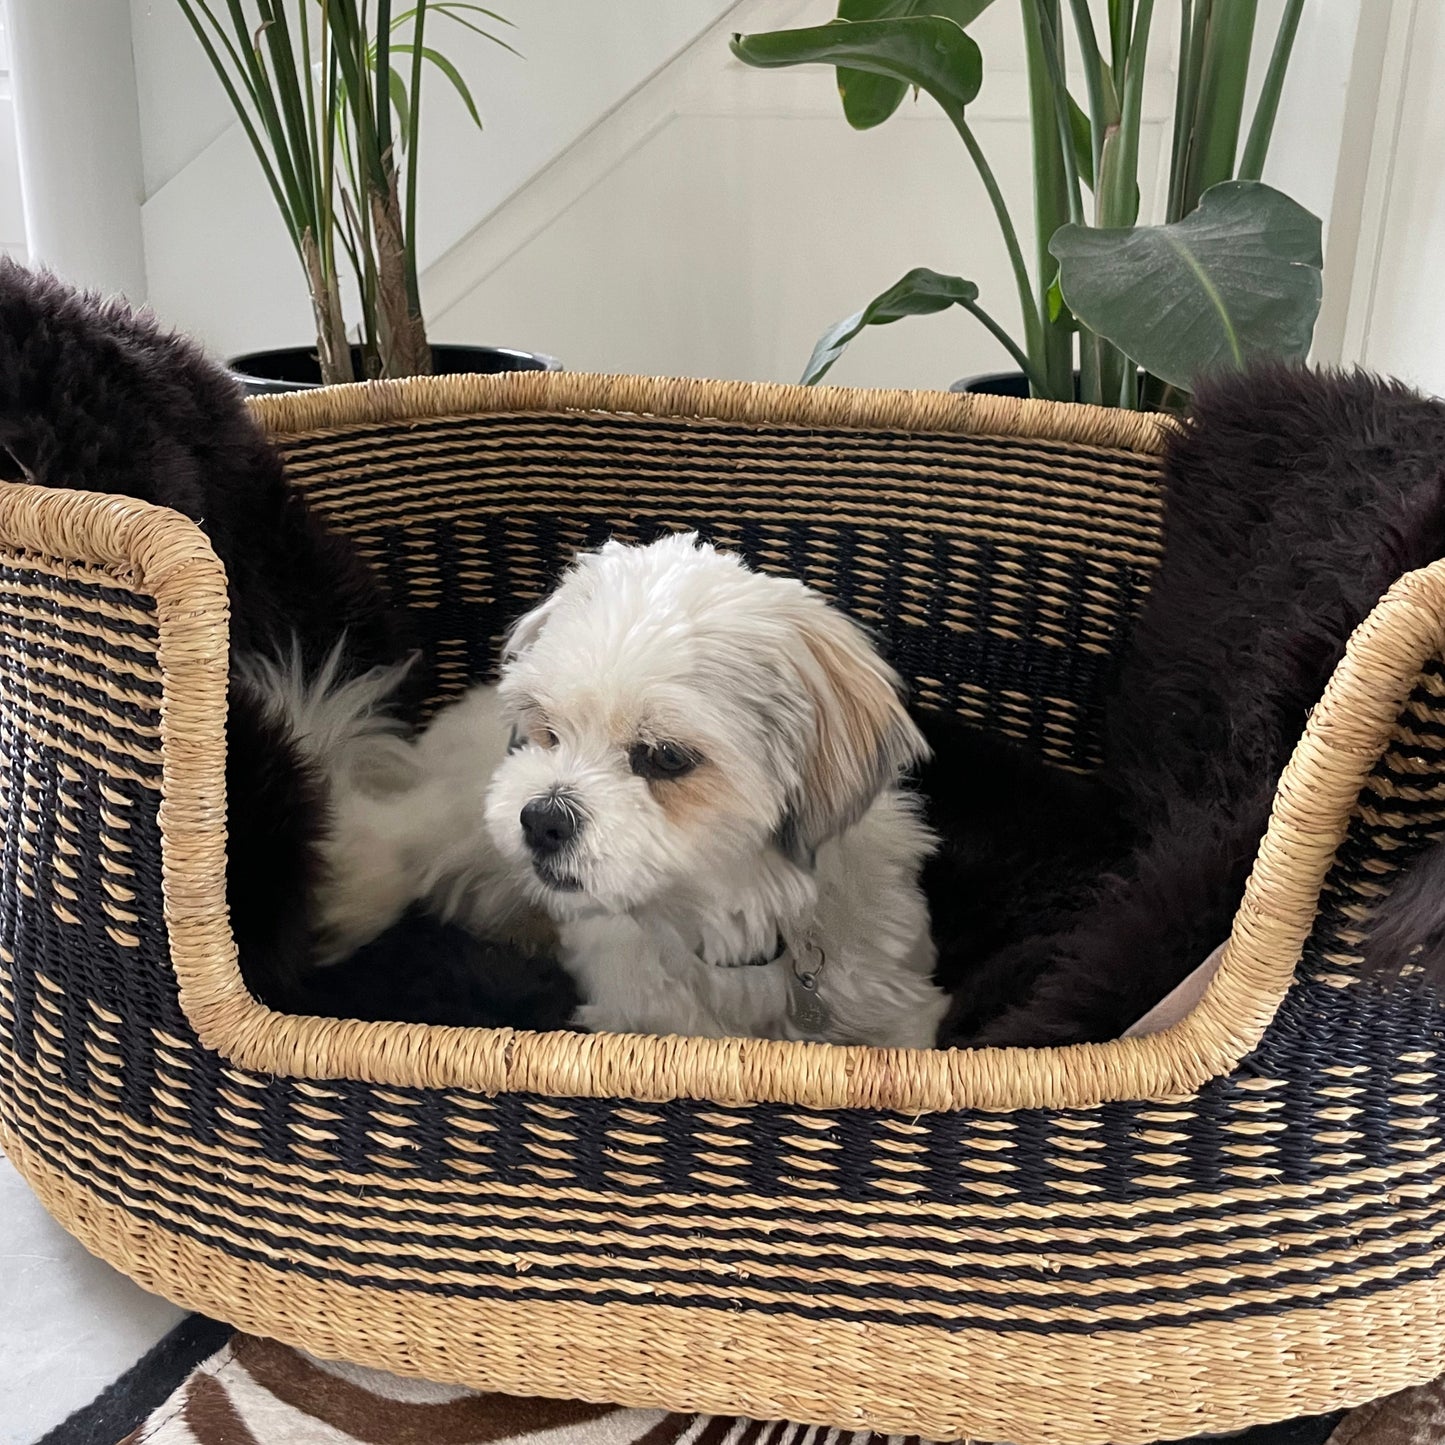 Dog basket in three sizes woven in sea grass. Carry goods and Fair Trade from Ghana